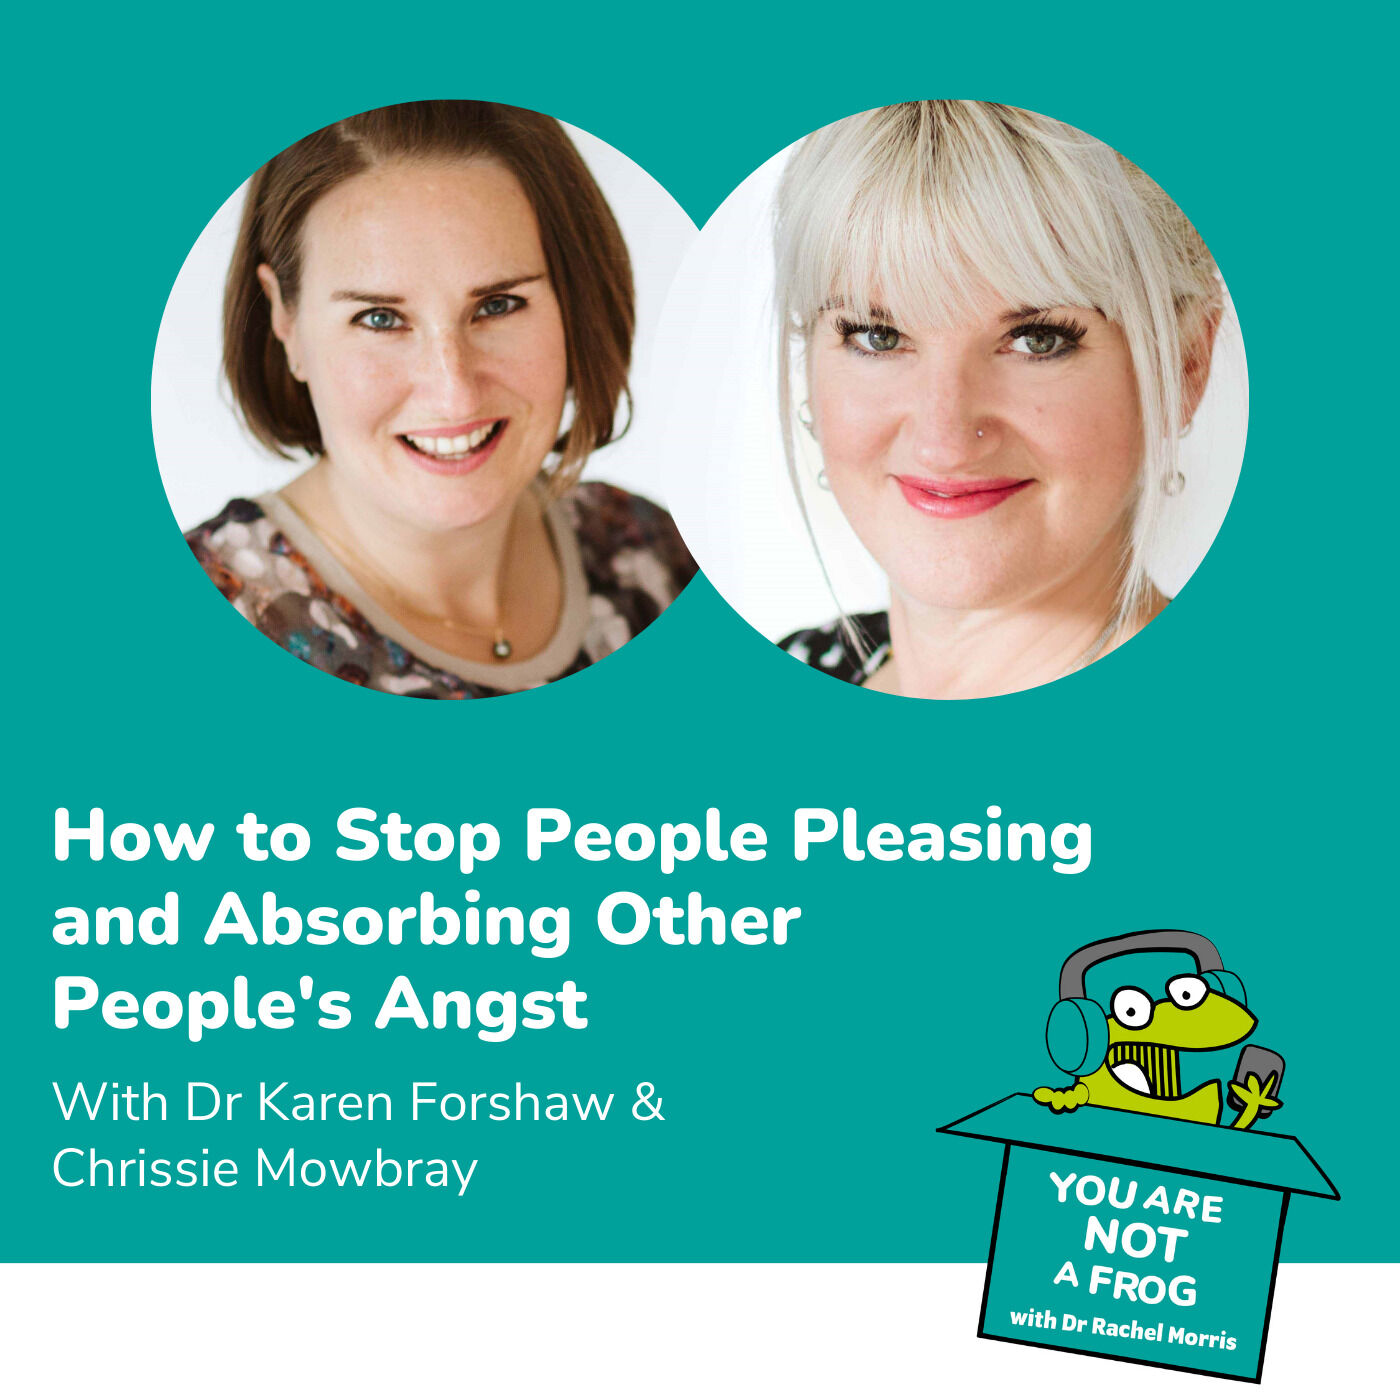 How to Stop People Pleasing and Absorbing Other People’s Angst